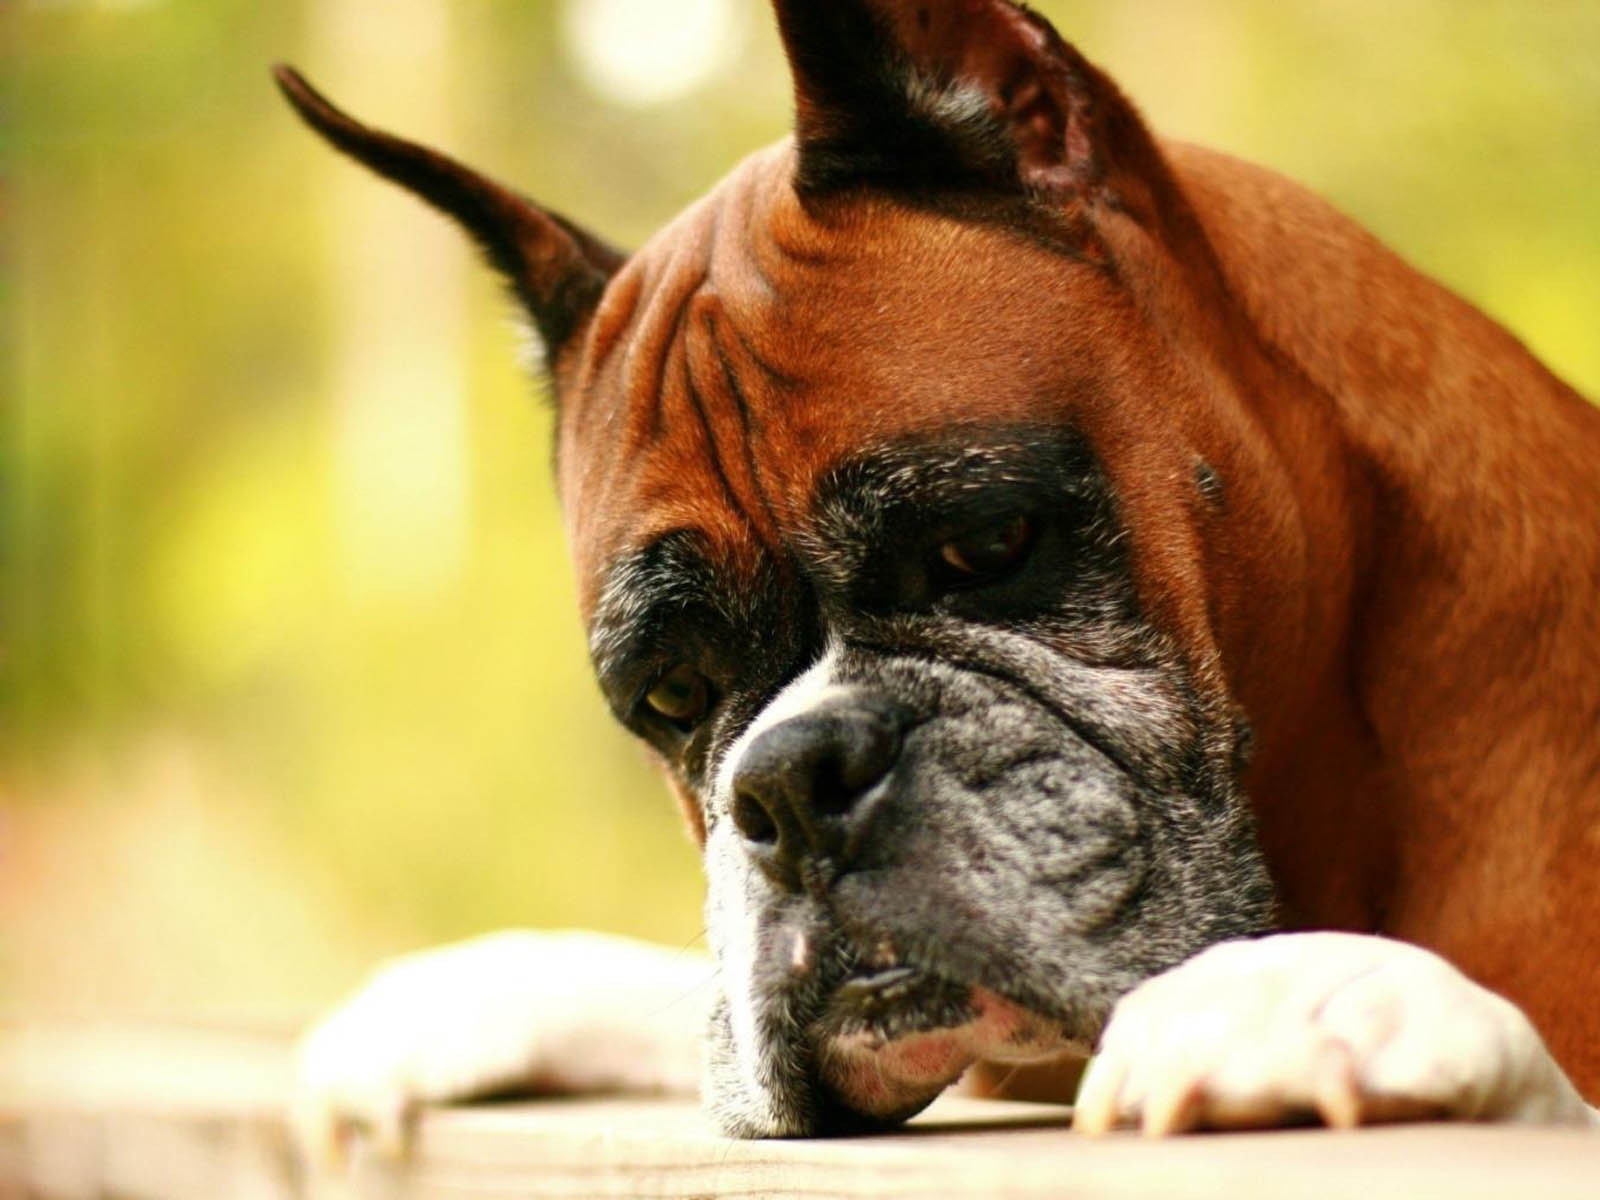 Tag: Boxer Dog Wallpapers, Images, Photos, Pictures and Backgrounds ...